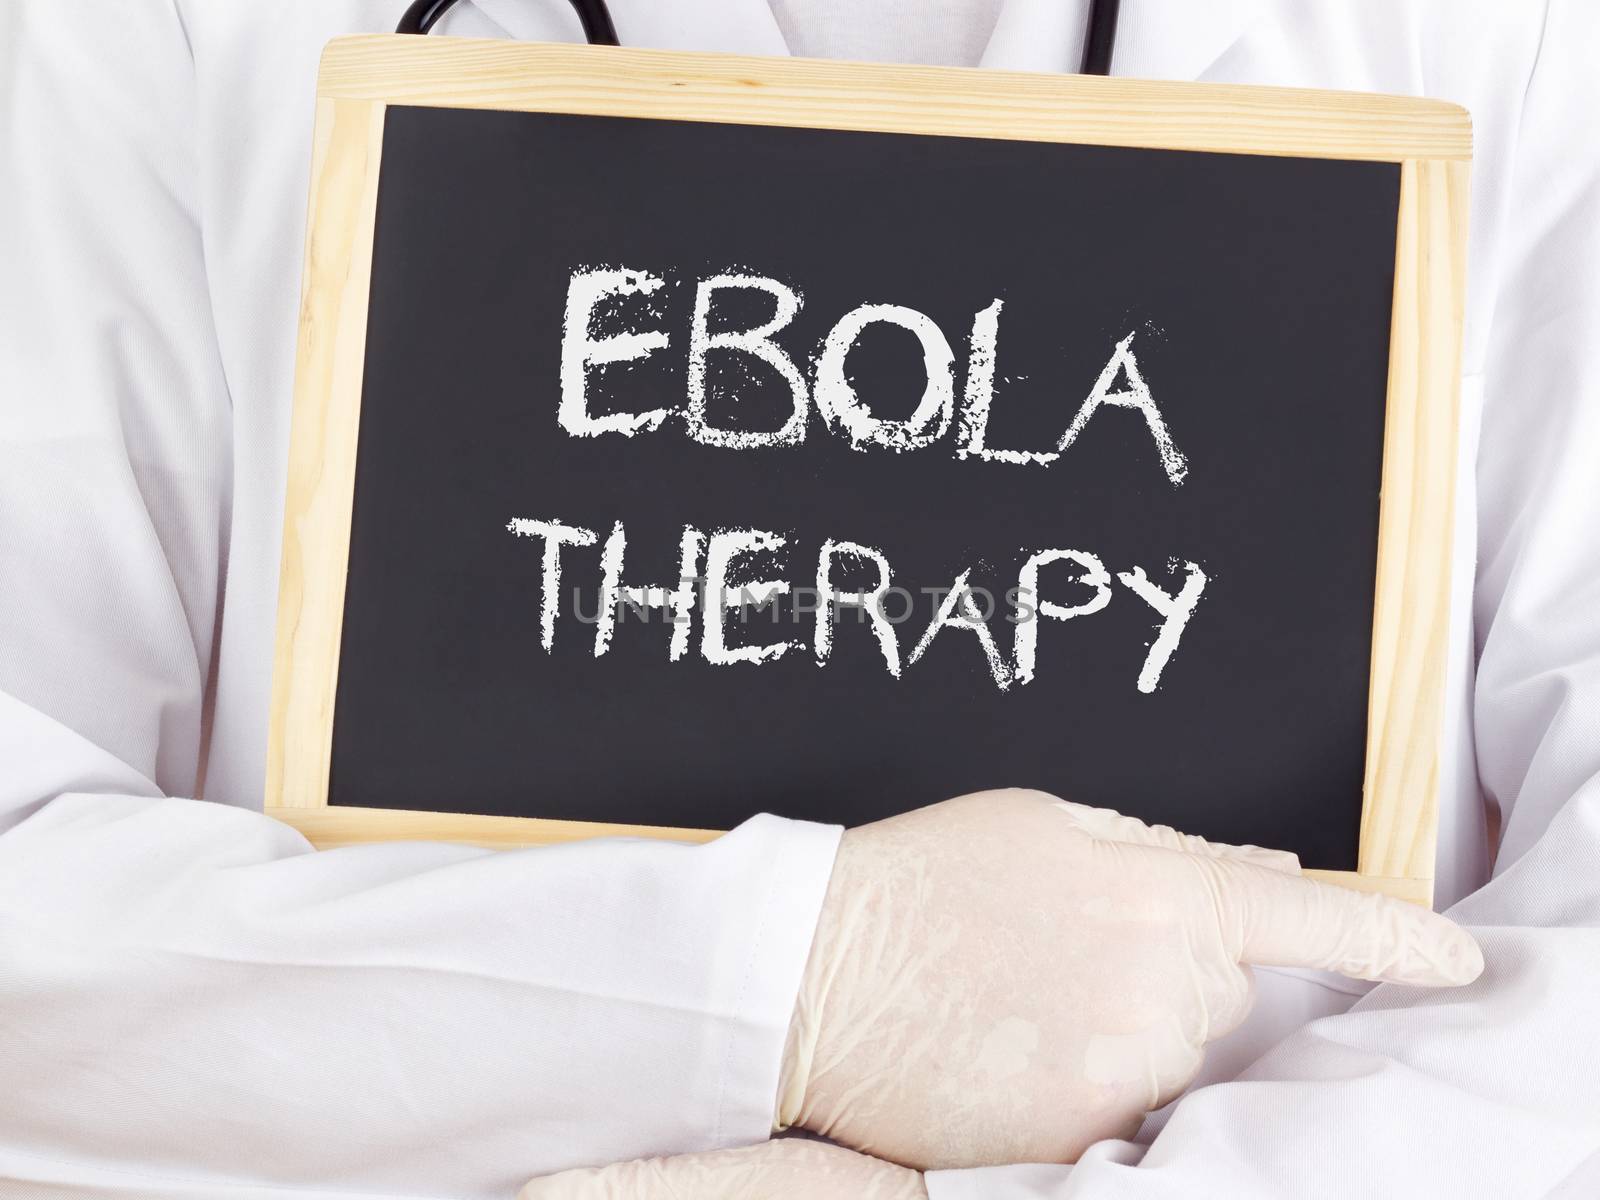 Doctor shows information: Ebola therapy by gwolters